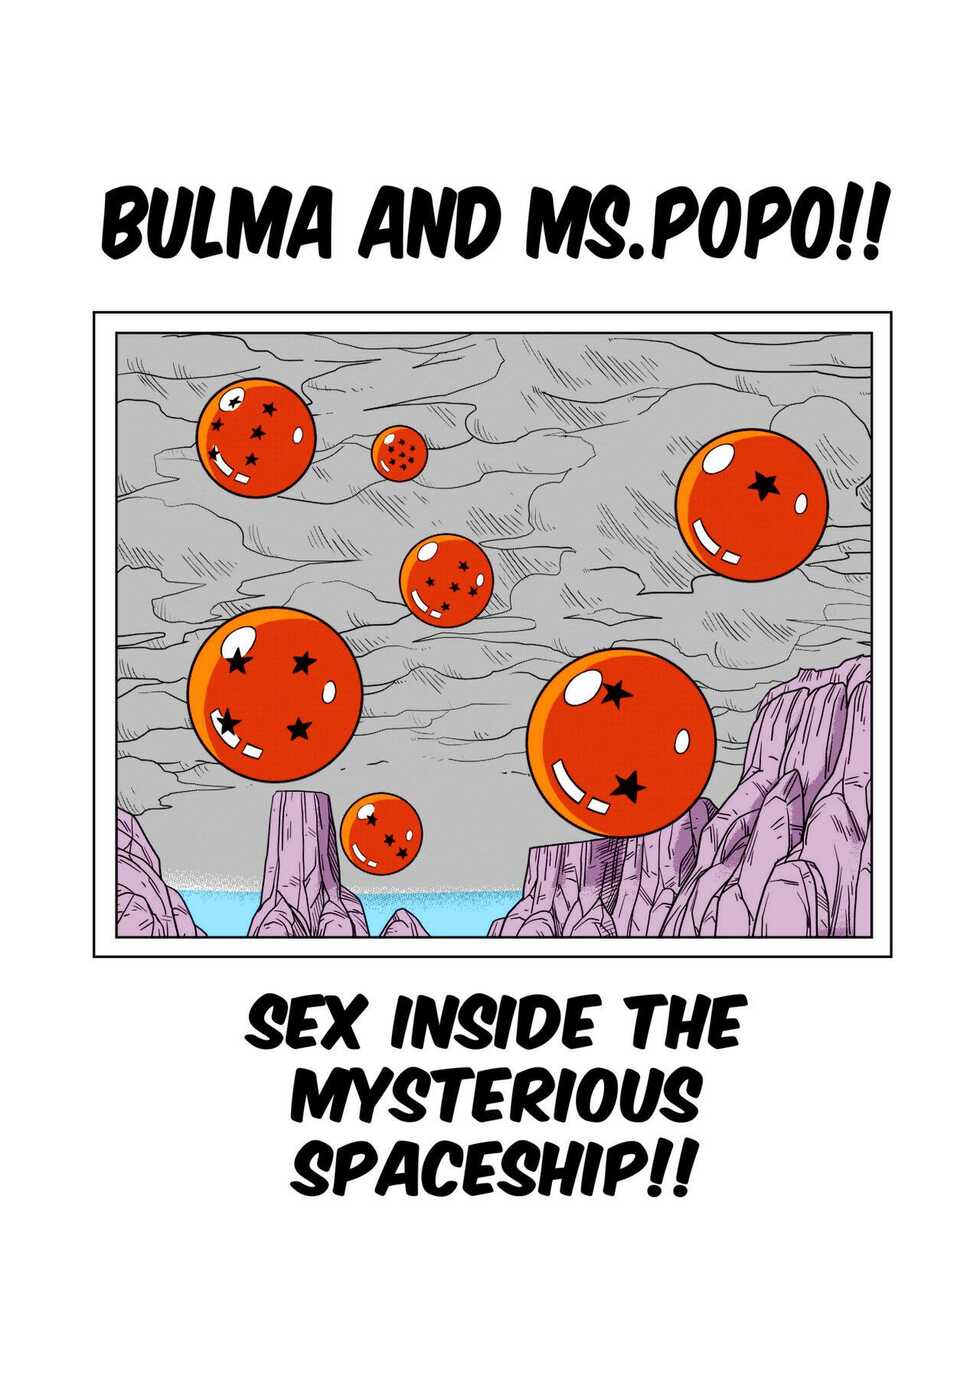 [Yamamoto] Bulma Meets Mr.Popo - Sex inside the Mysterious Spaceship! (Dragon Ball Z) [Uncensored] [FRENCH] [Colorized] - Page 3